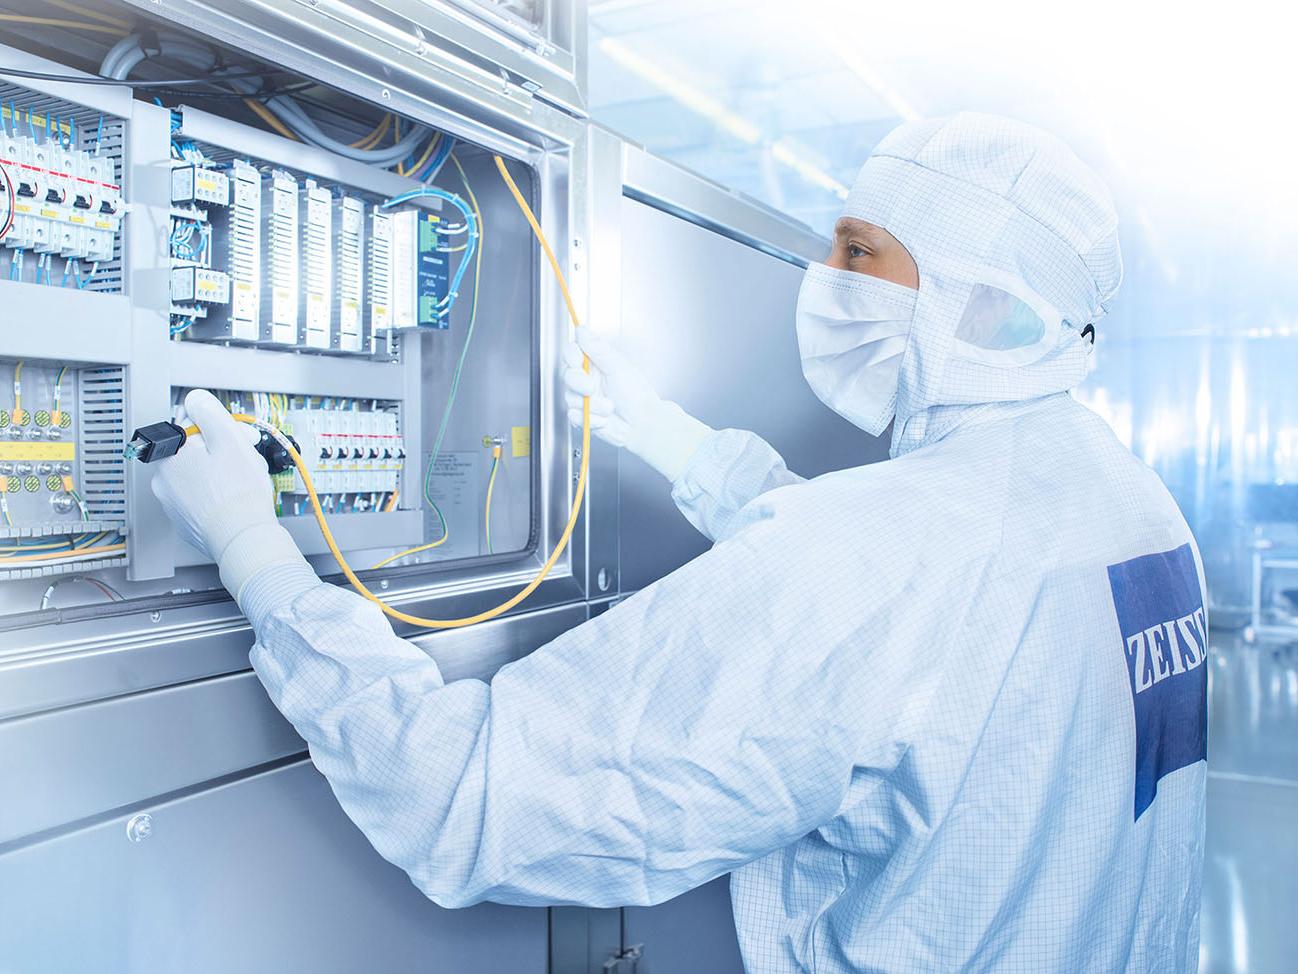 An employee works on an electronic circuit in the clean room at ZEISS SMT